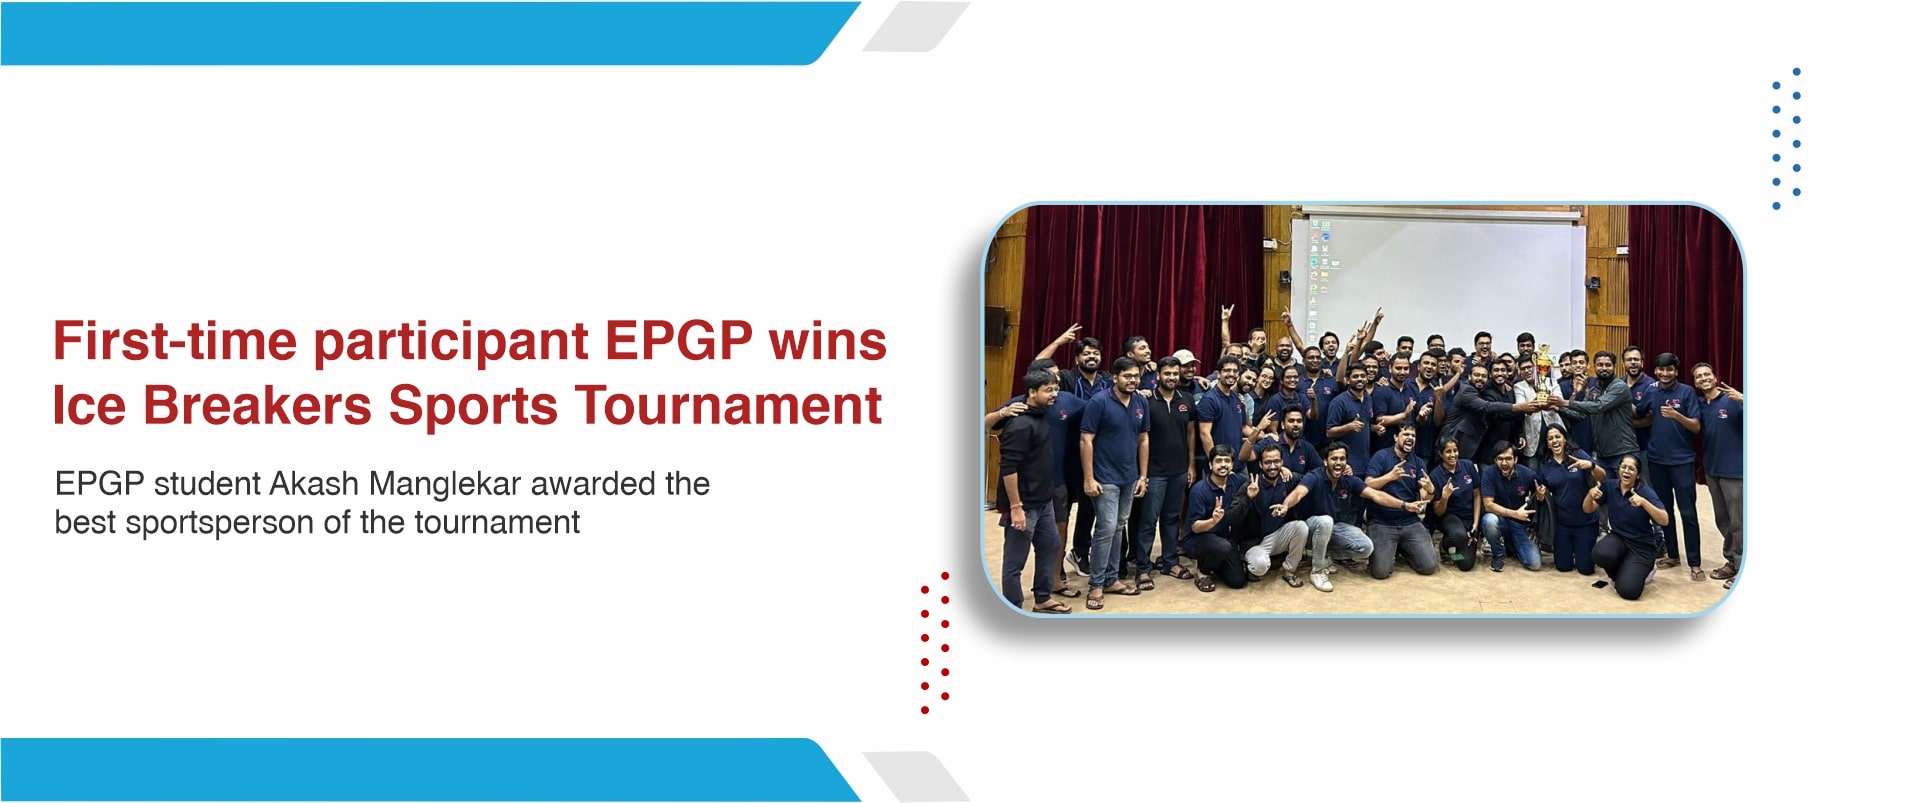 First-time participant EPGP wins Ice Breakers Sports Tournament